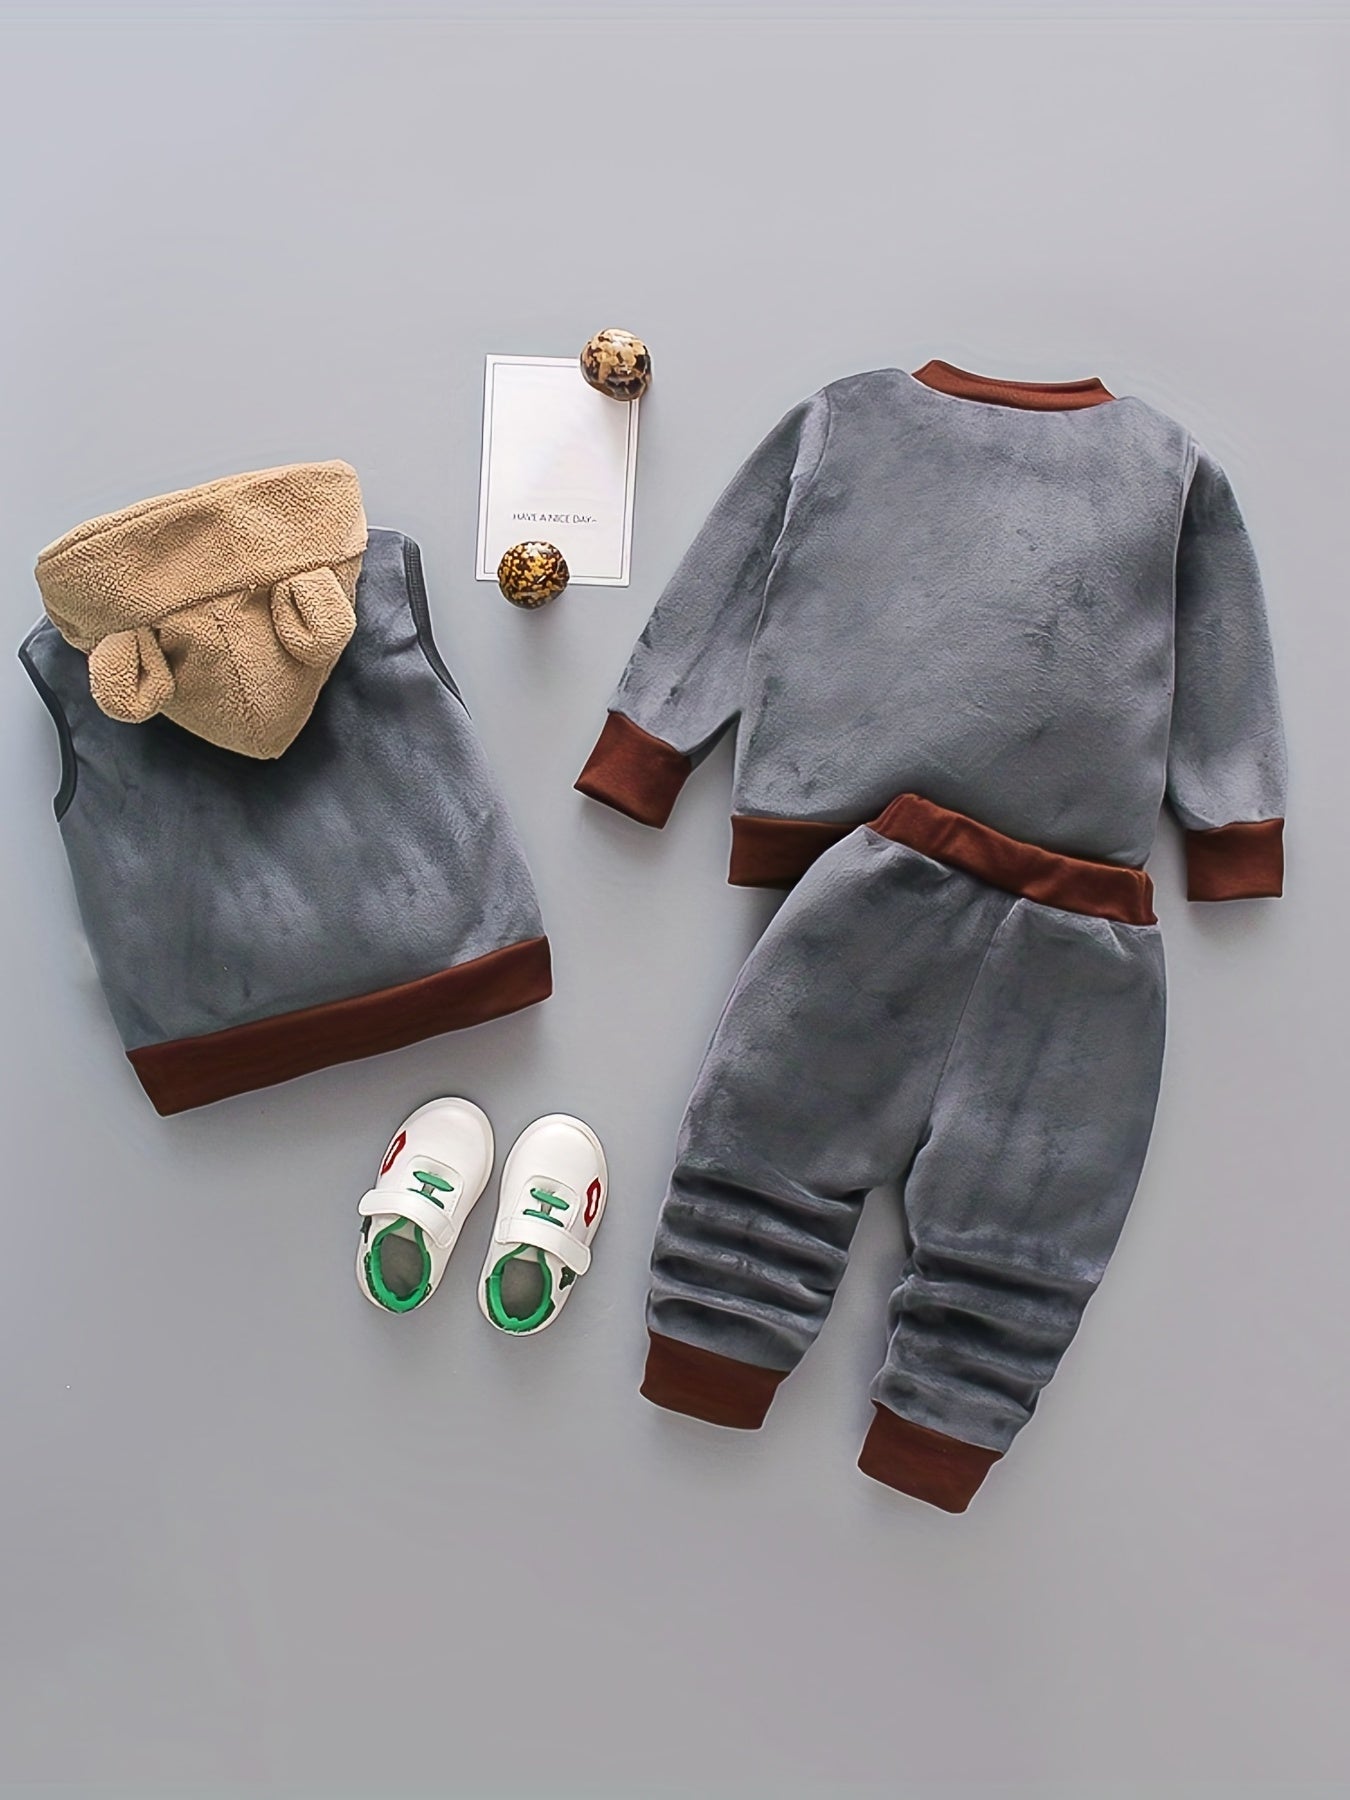 Boy's Thermal Velvet Outfit 3pcs, Bear Patchwork Sweatshirt & Hooded Vest & Jogger Pants Set, Toddler Kid's Clothes For Spring Fall Winter